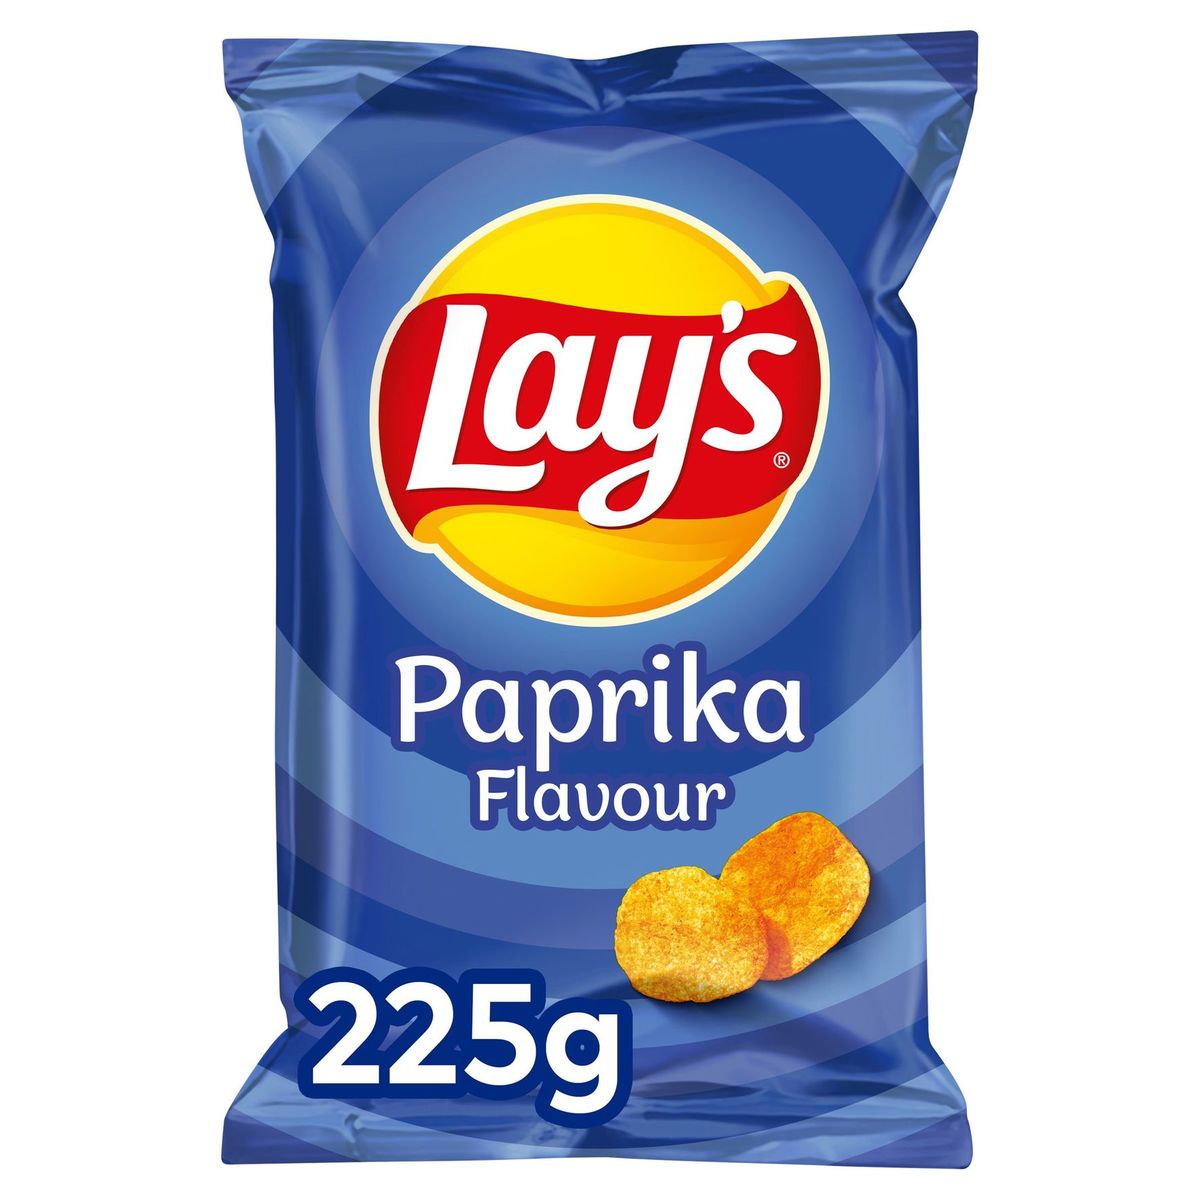 Lay's Aardappelchips Paprika Flavour 225g